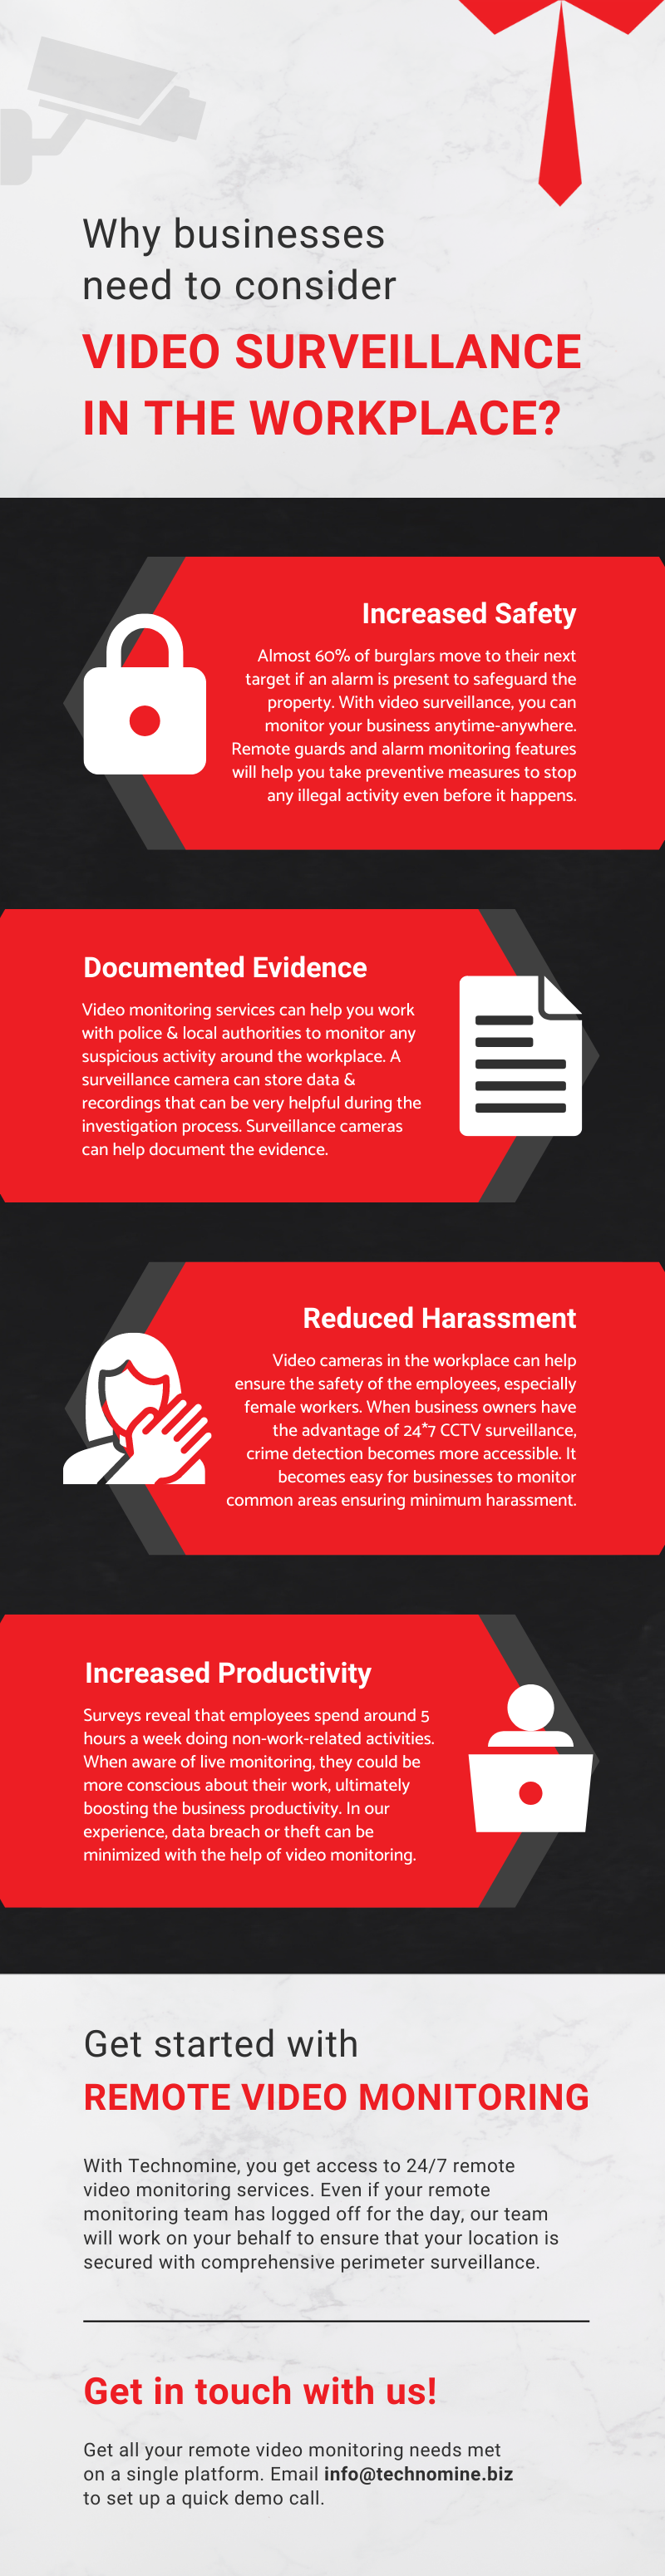 Video Surveillance at workplace - infographic